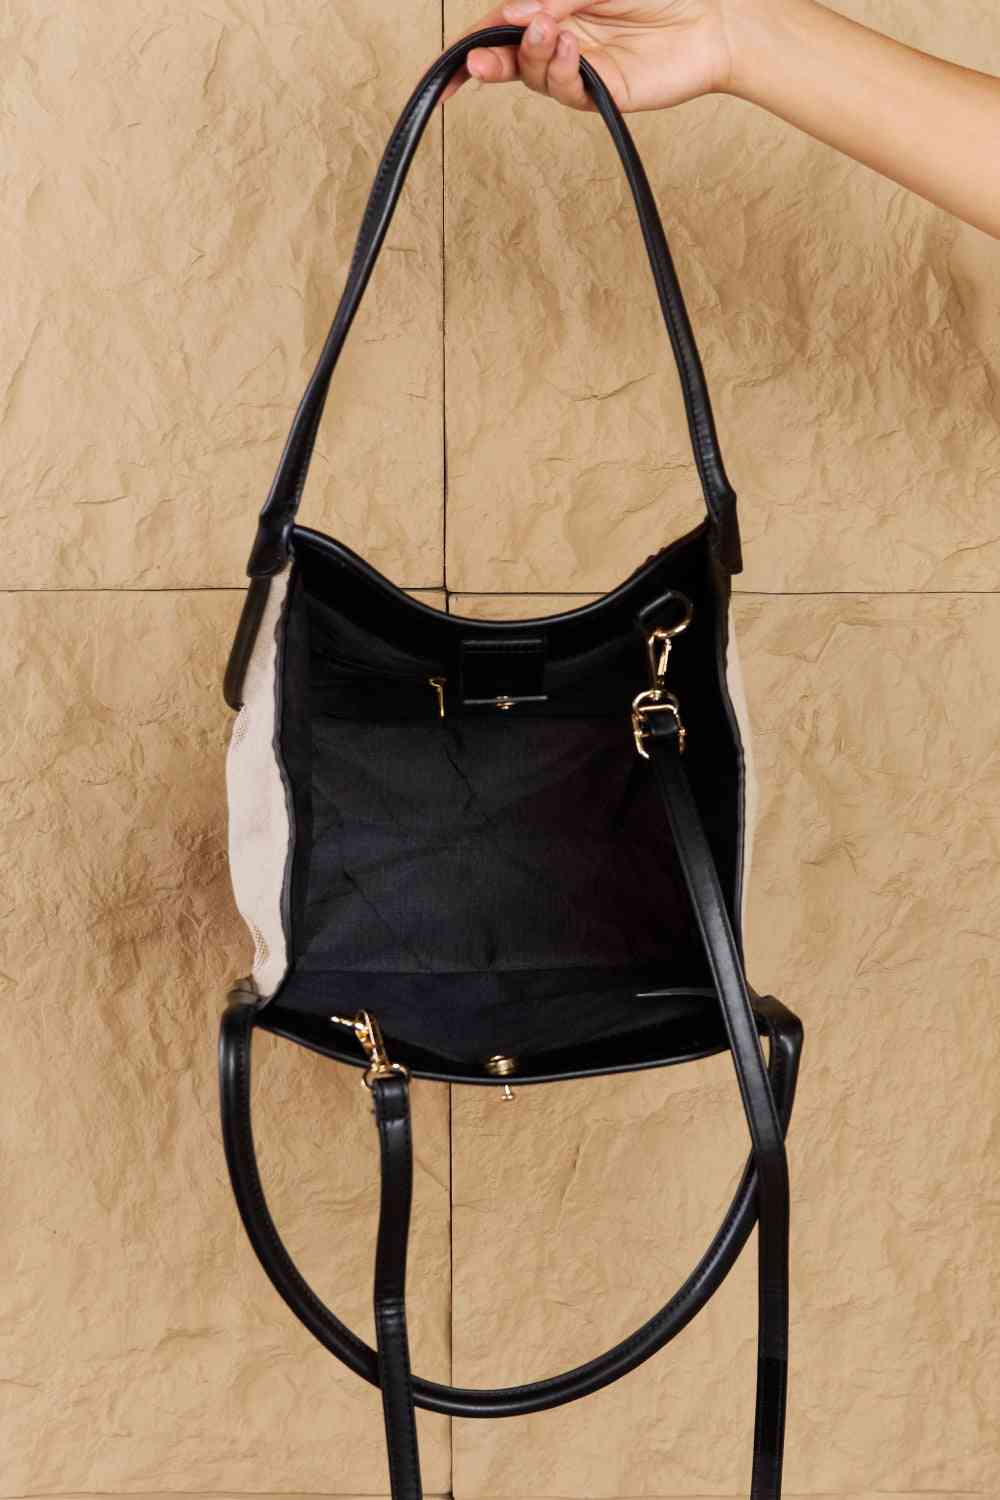 Just Chic Faux Leather Trim Tote Bag in Black